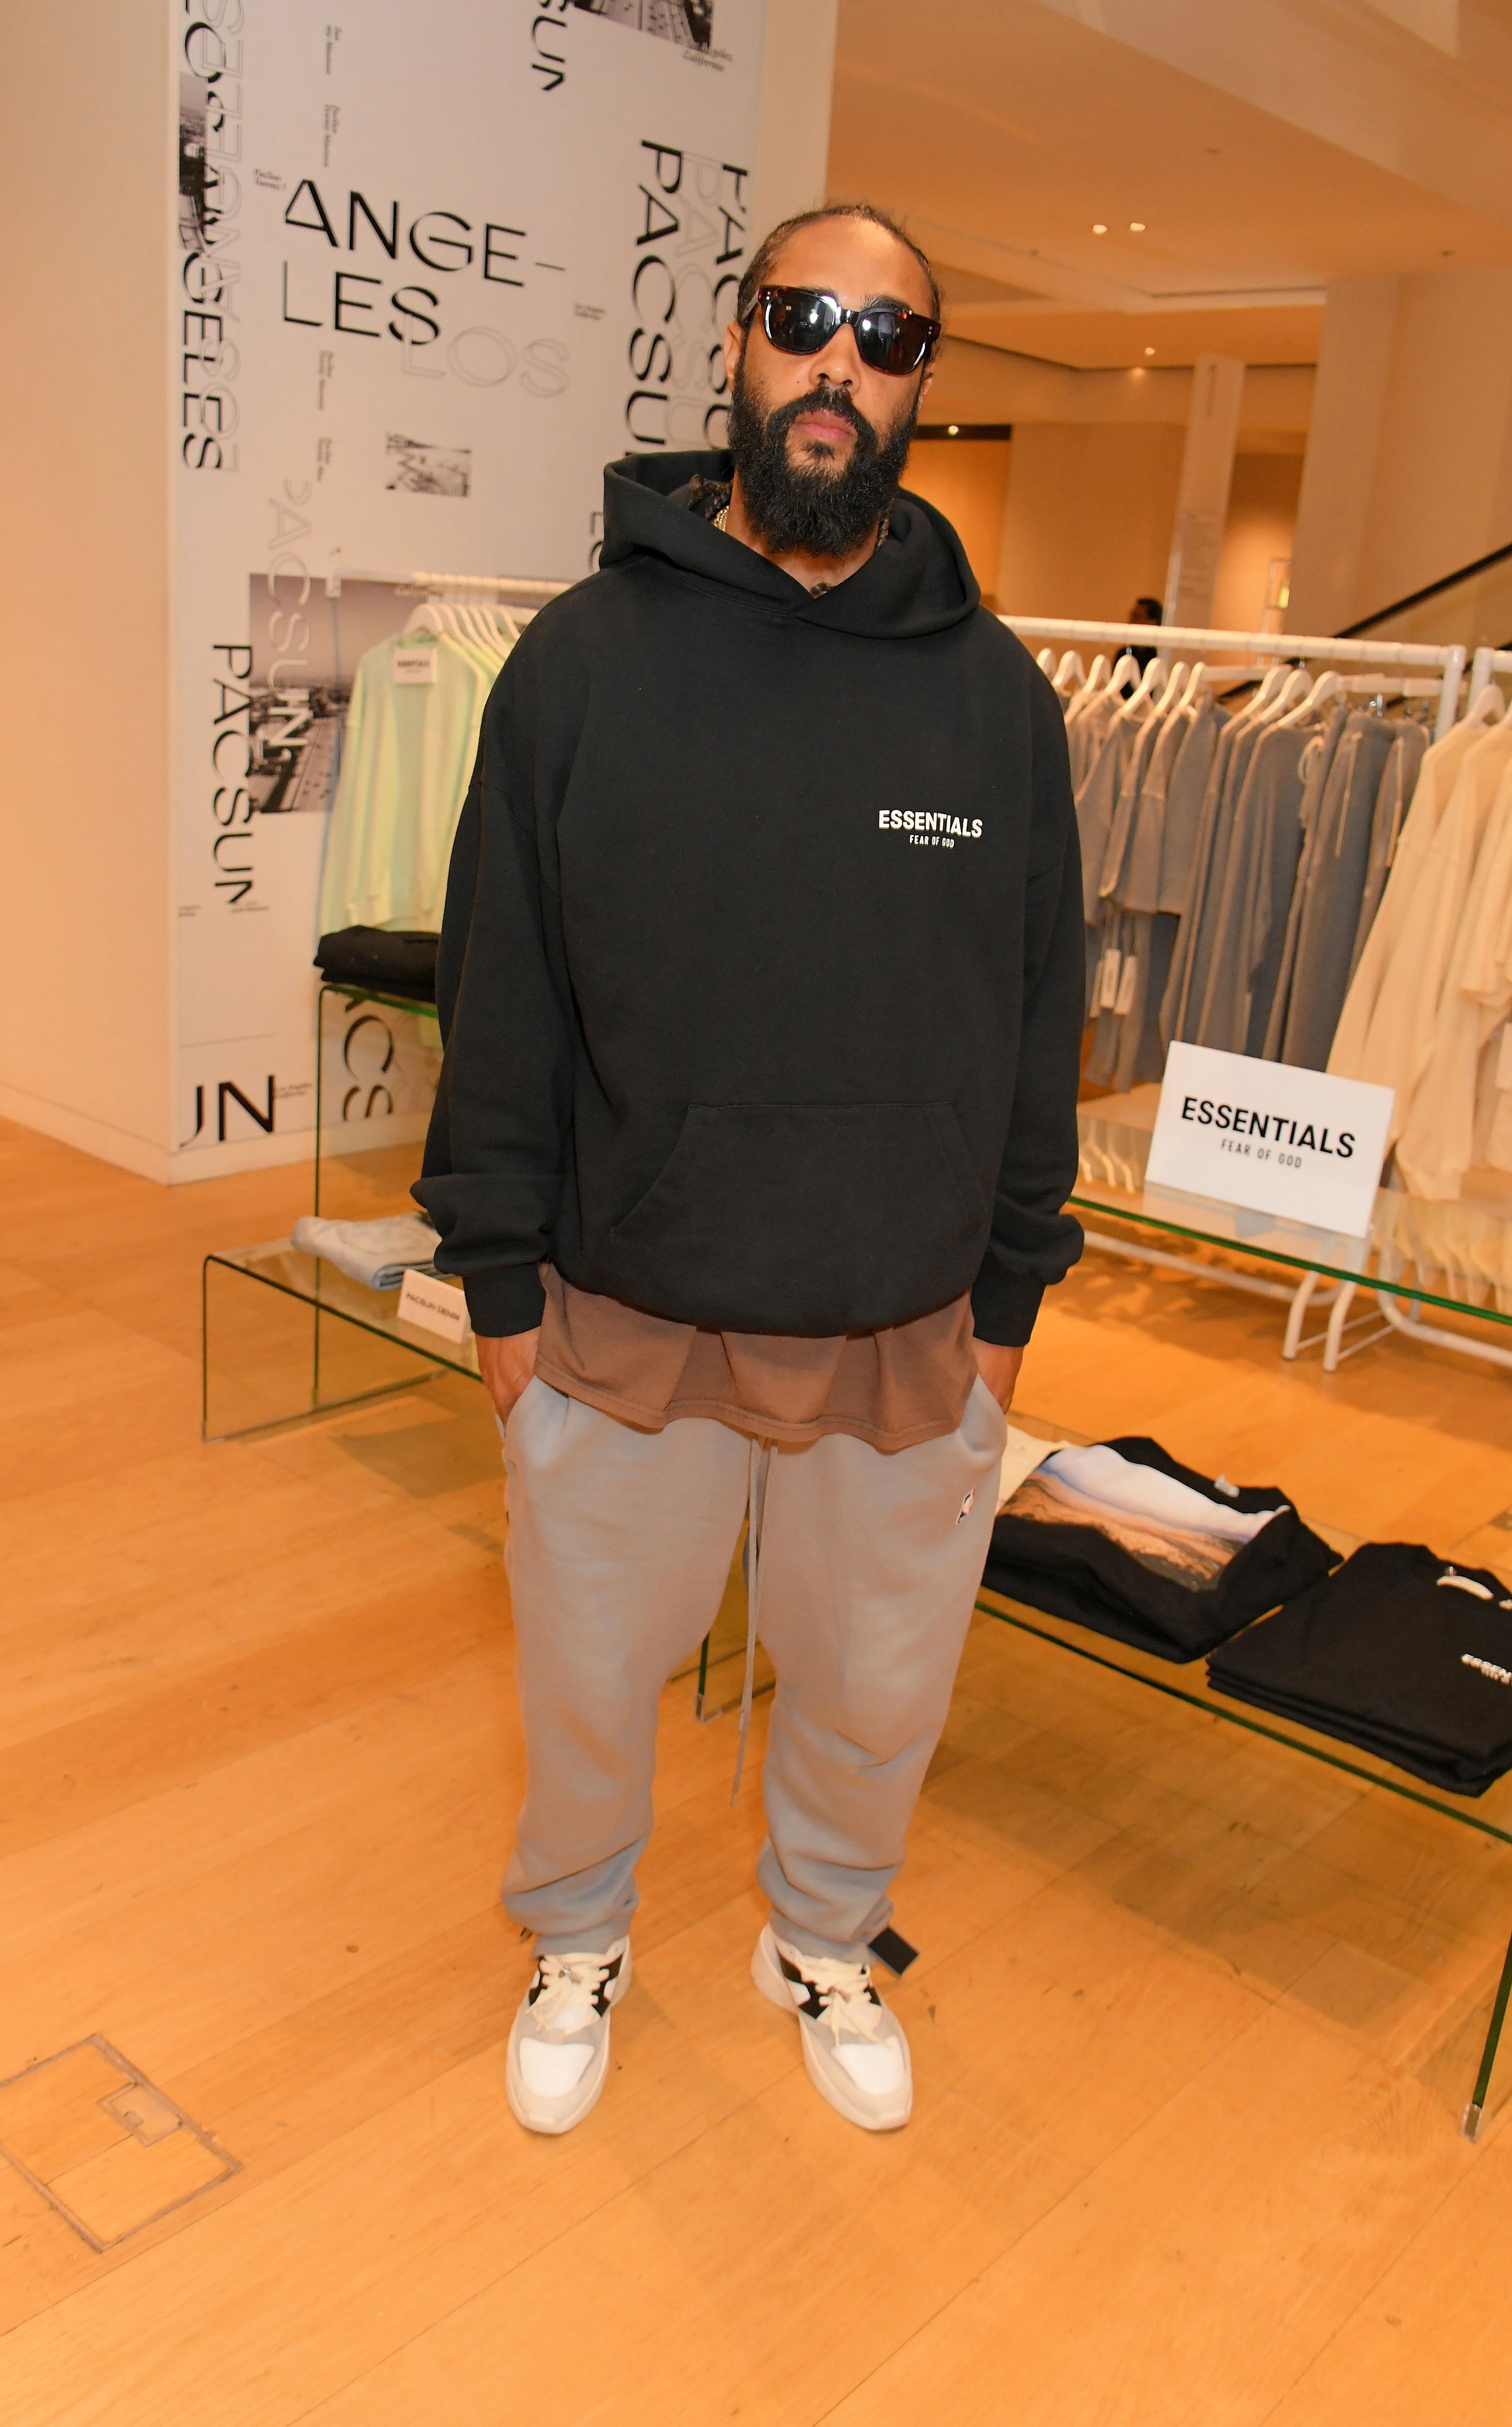 Jerry Lorenzo Looks to His Roots for Fear of God's New Collection